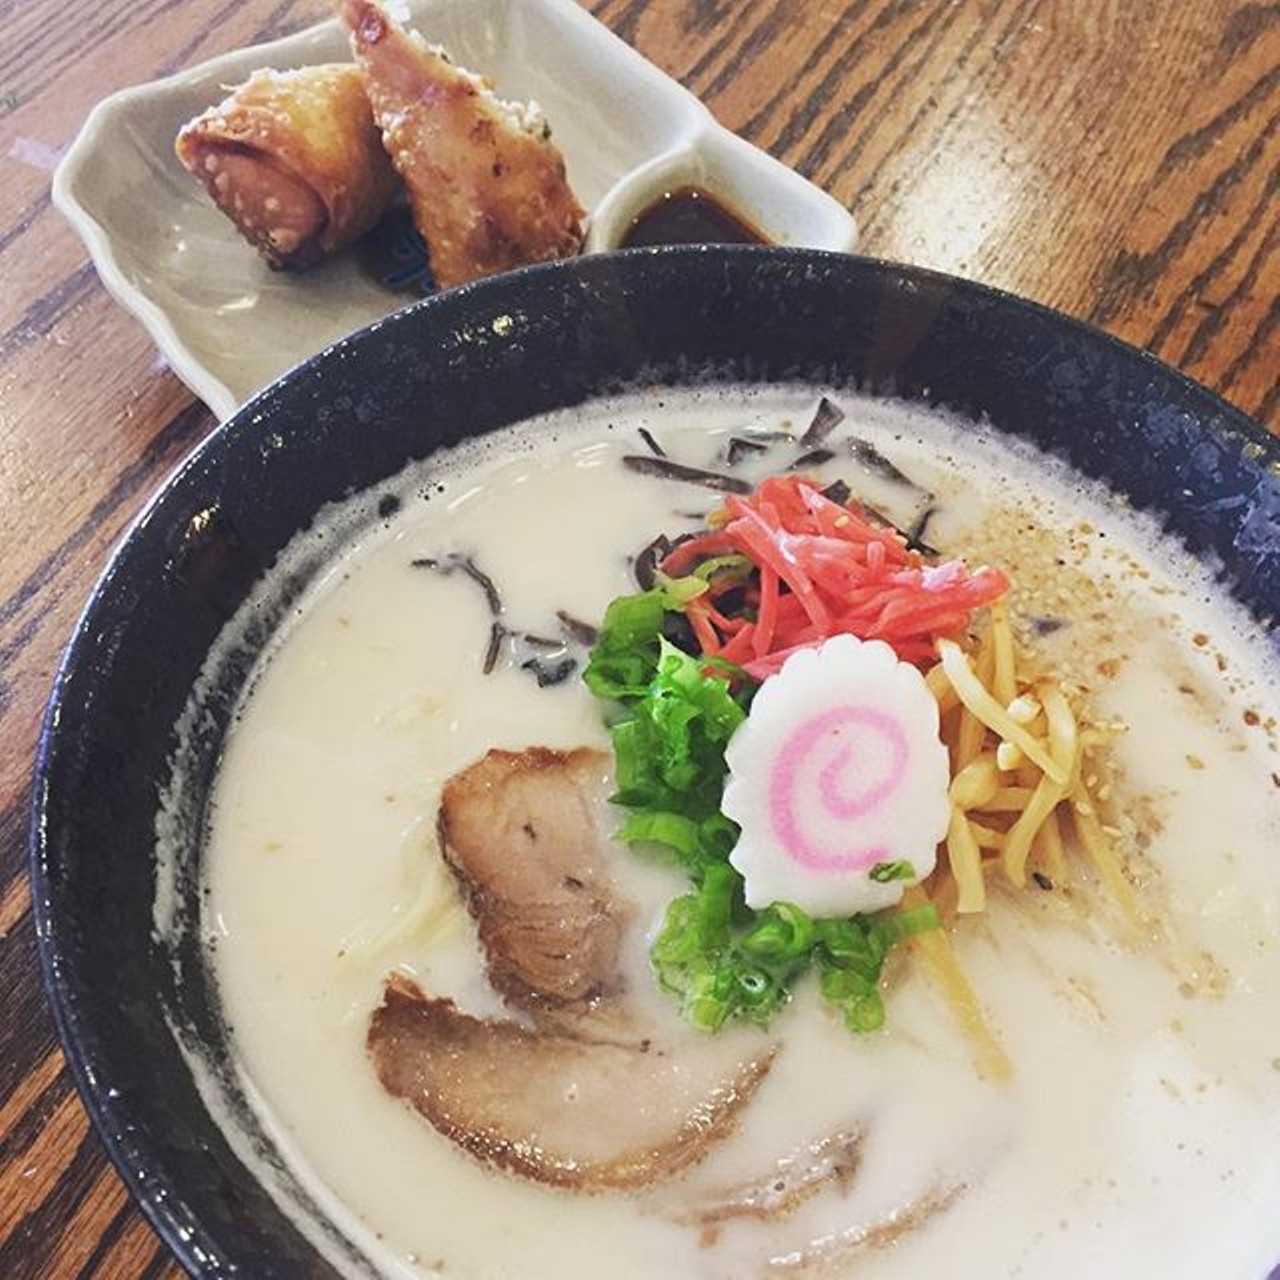 Tonkatsu ramen from Sapporo Ramen
5080 W. Colonial Drive, 407-203-6777
The rich pork bone based ramen is an inexpensively priced noodle bowl and by far, the best on the menu.
Photo via yukil0ve/Instagram